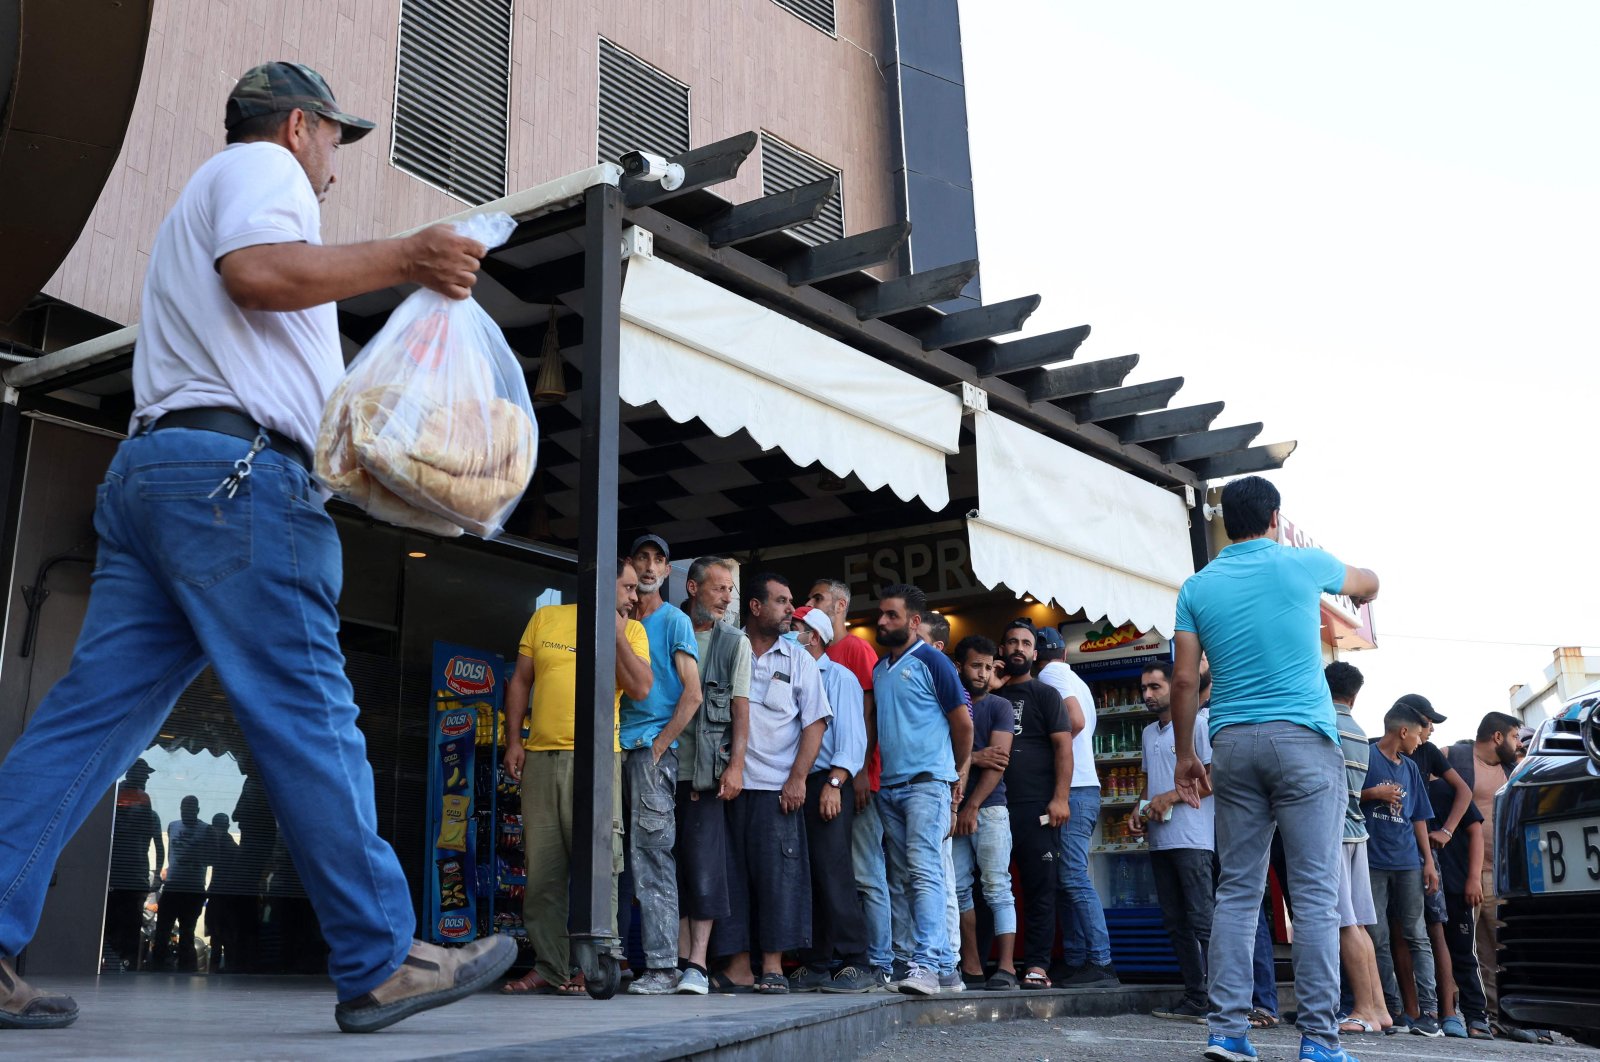 A man walks out of a bakery with a bag of subsidized flatbread, as others continue to wait in a queue, in the capital Beirut, Lebanon, July 29, 2022. (AFP Photo)